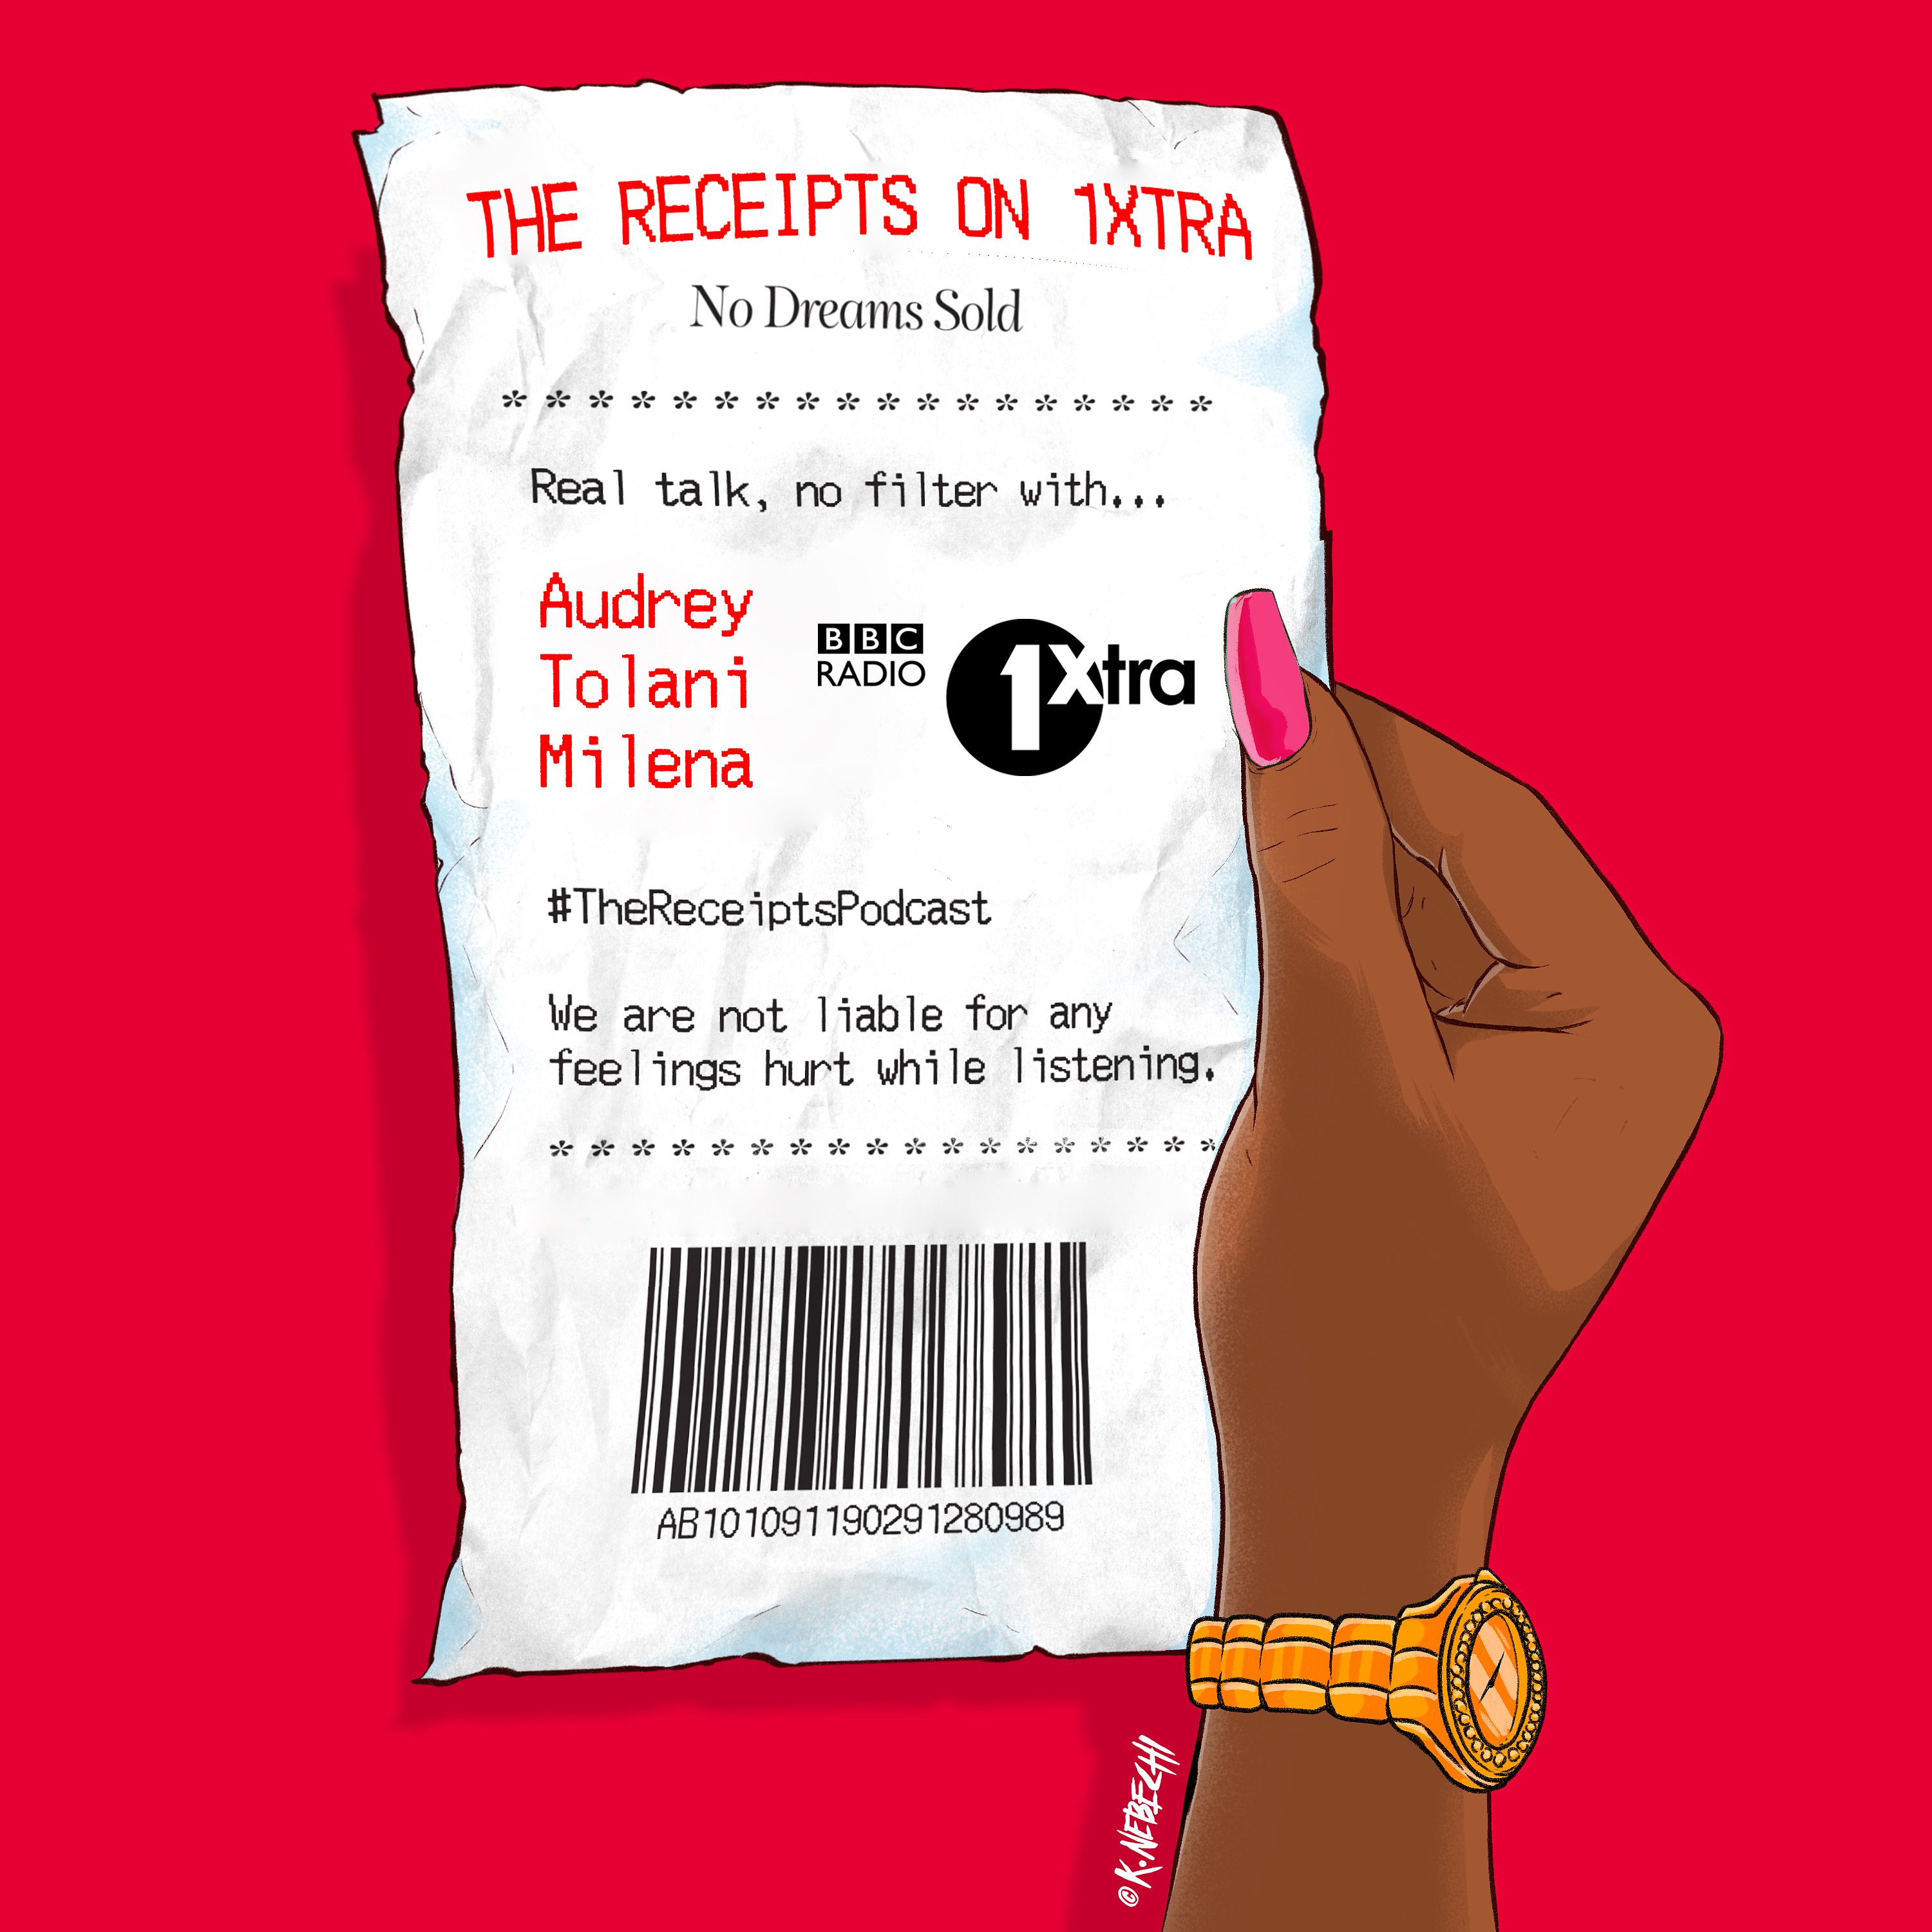 The Receipts On 1Xtra Episode 5